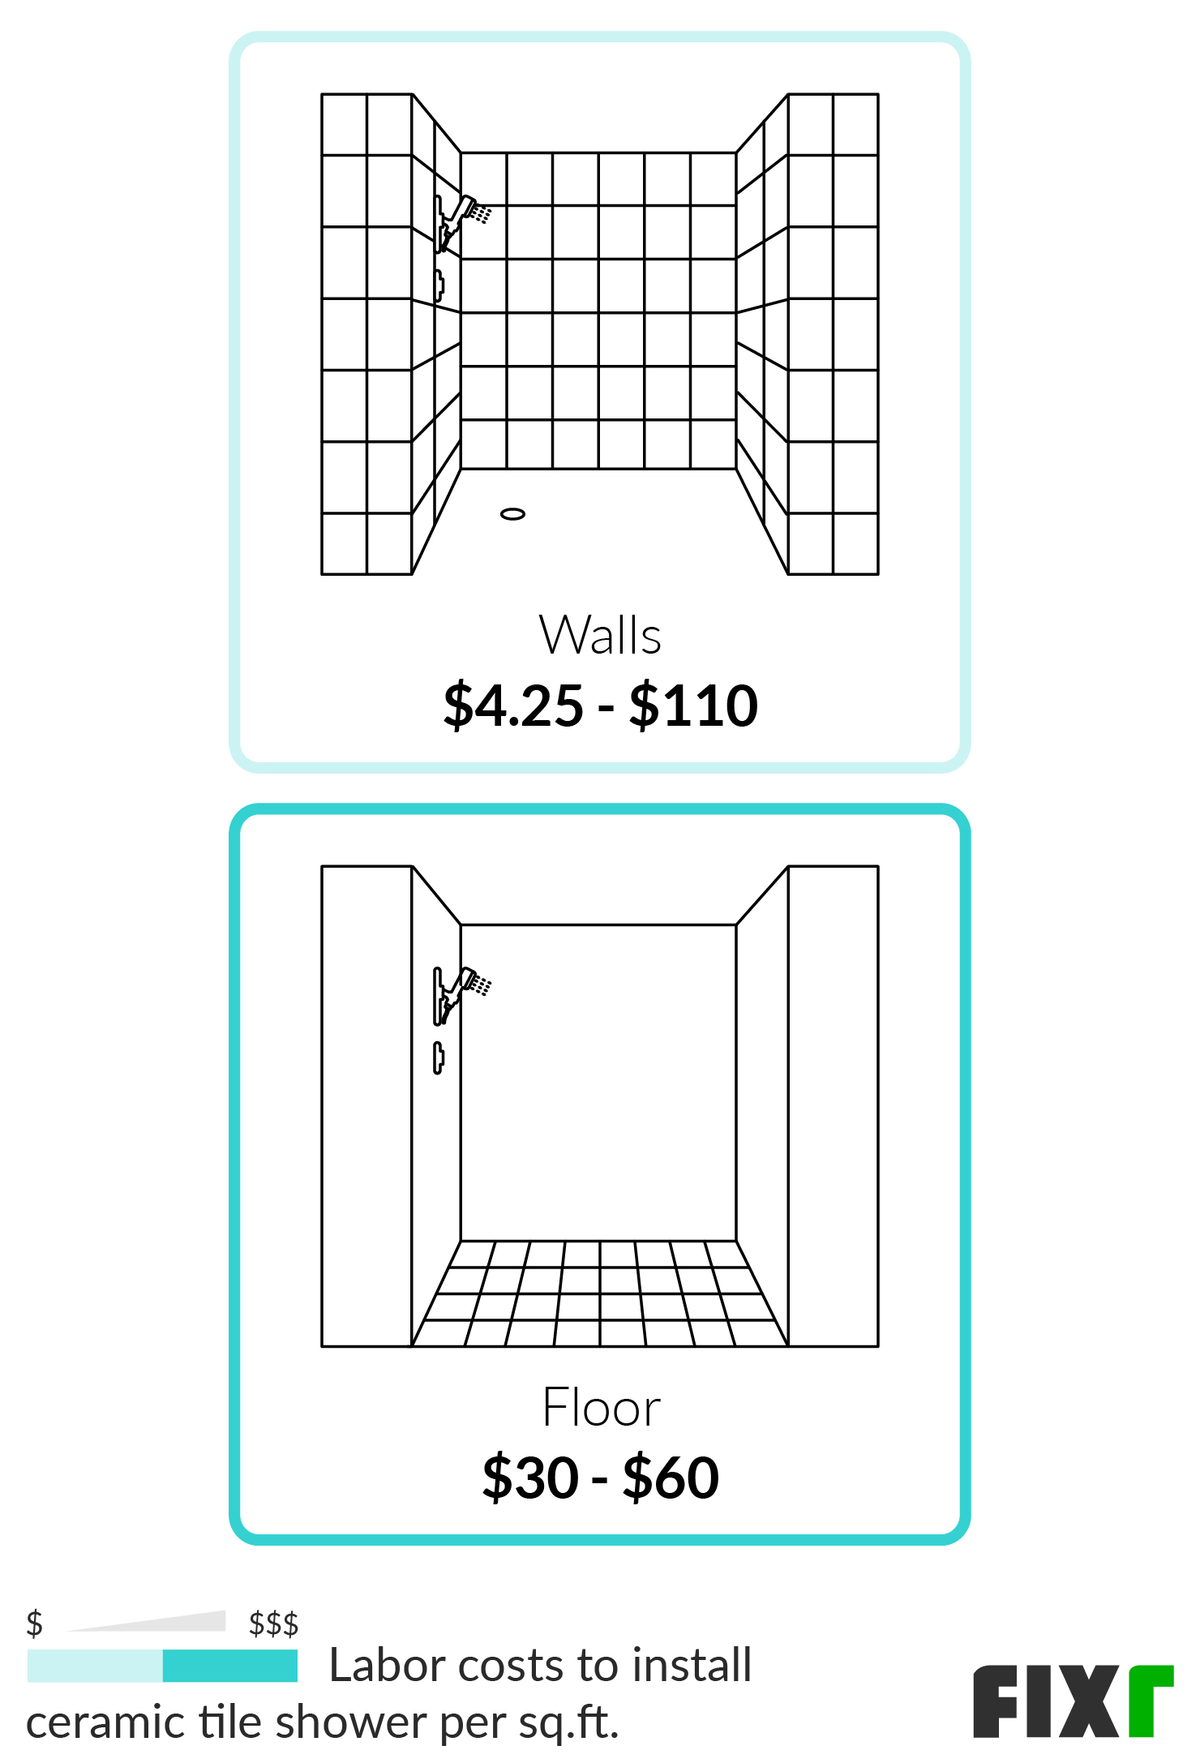 Cost To Install A Ceramic Tile Shower, What Is The Average Cost Per Square Foot To Install Ceramic Tile